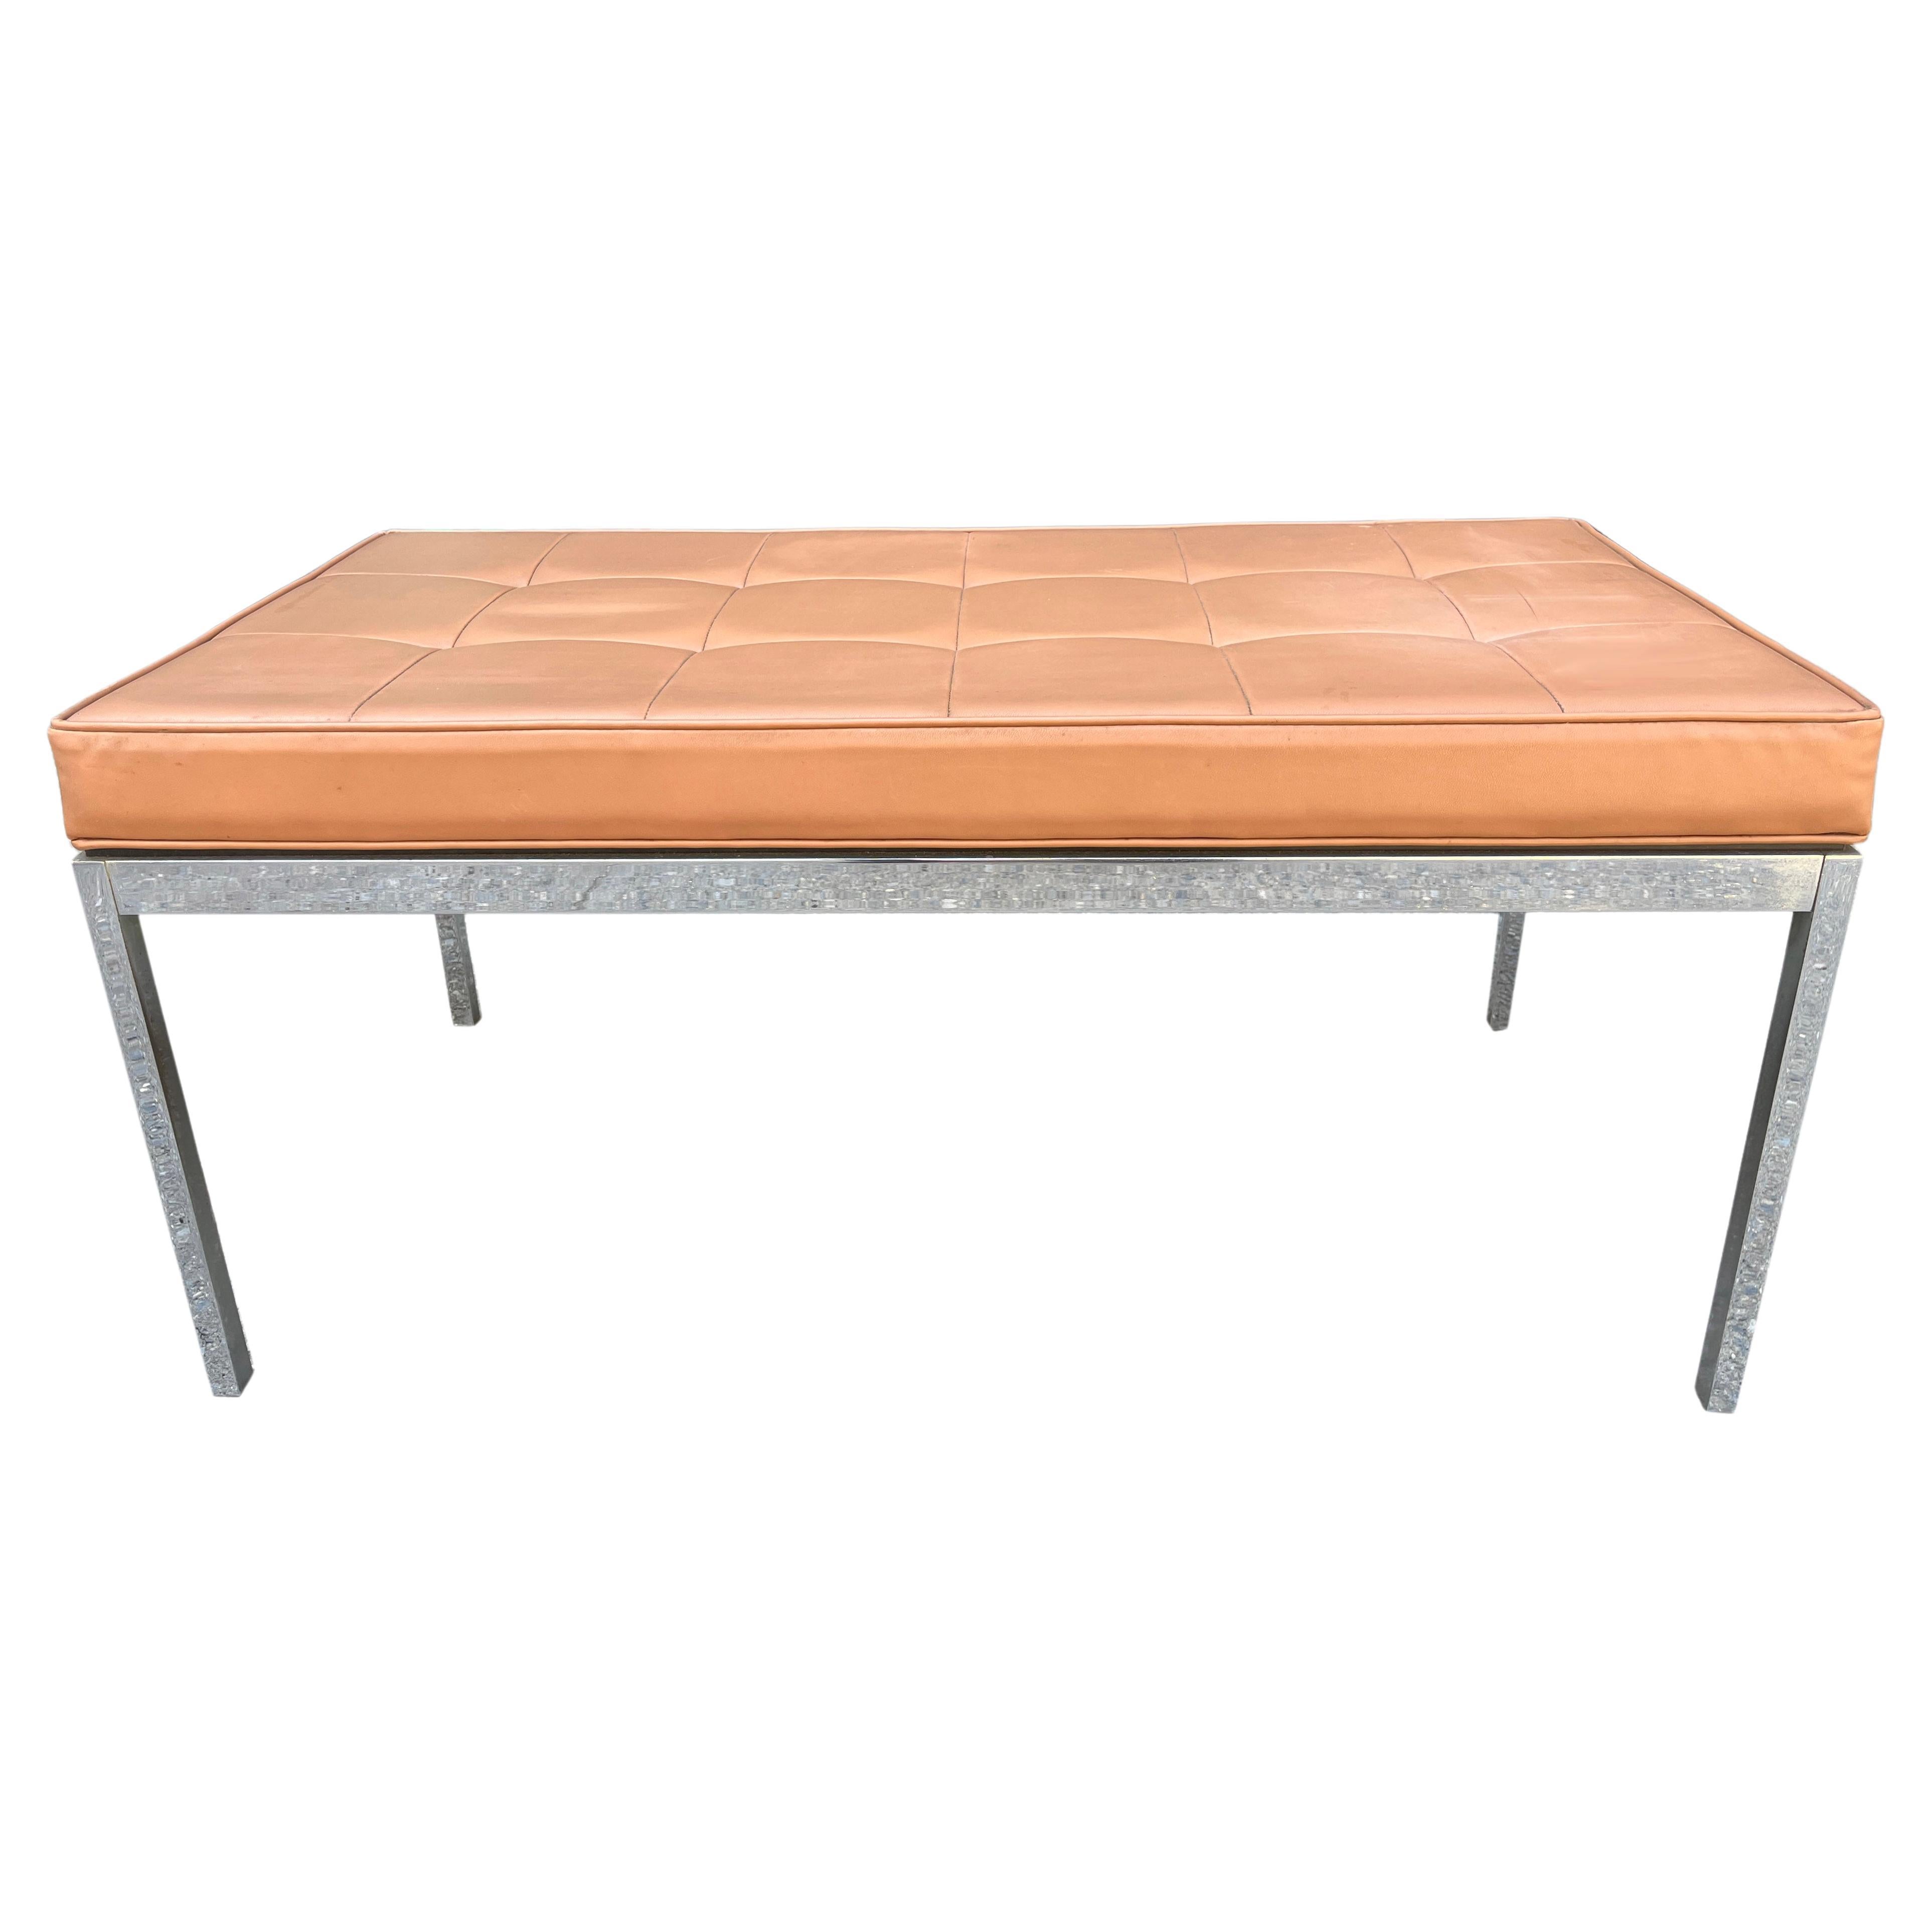 Early Midcentury Florence Knoll Bench 36''